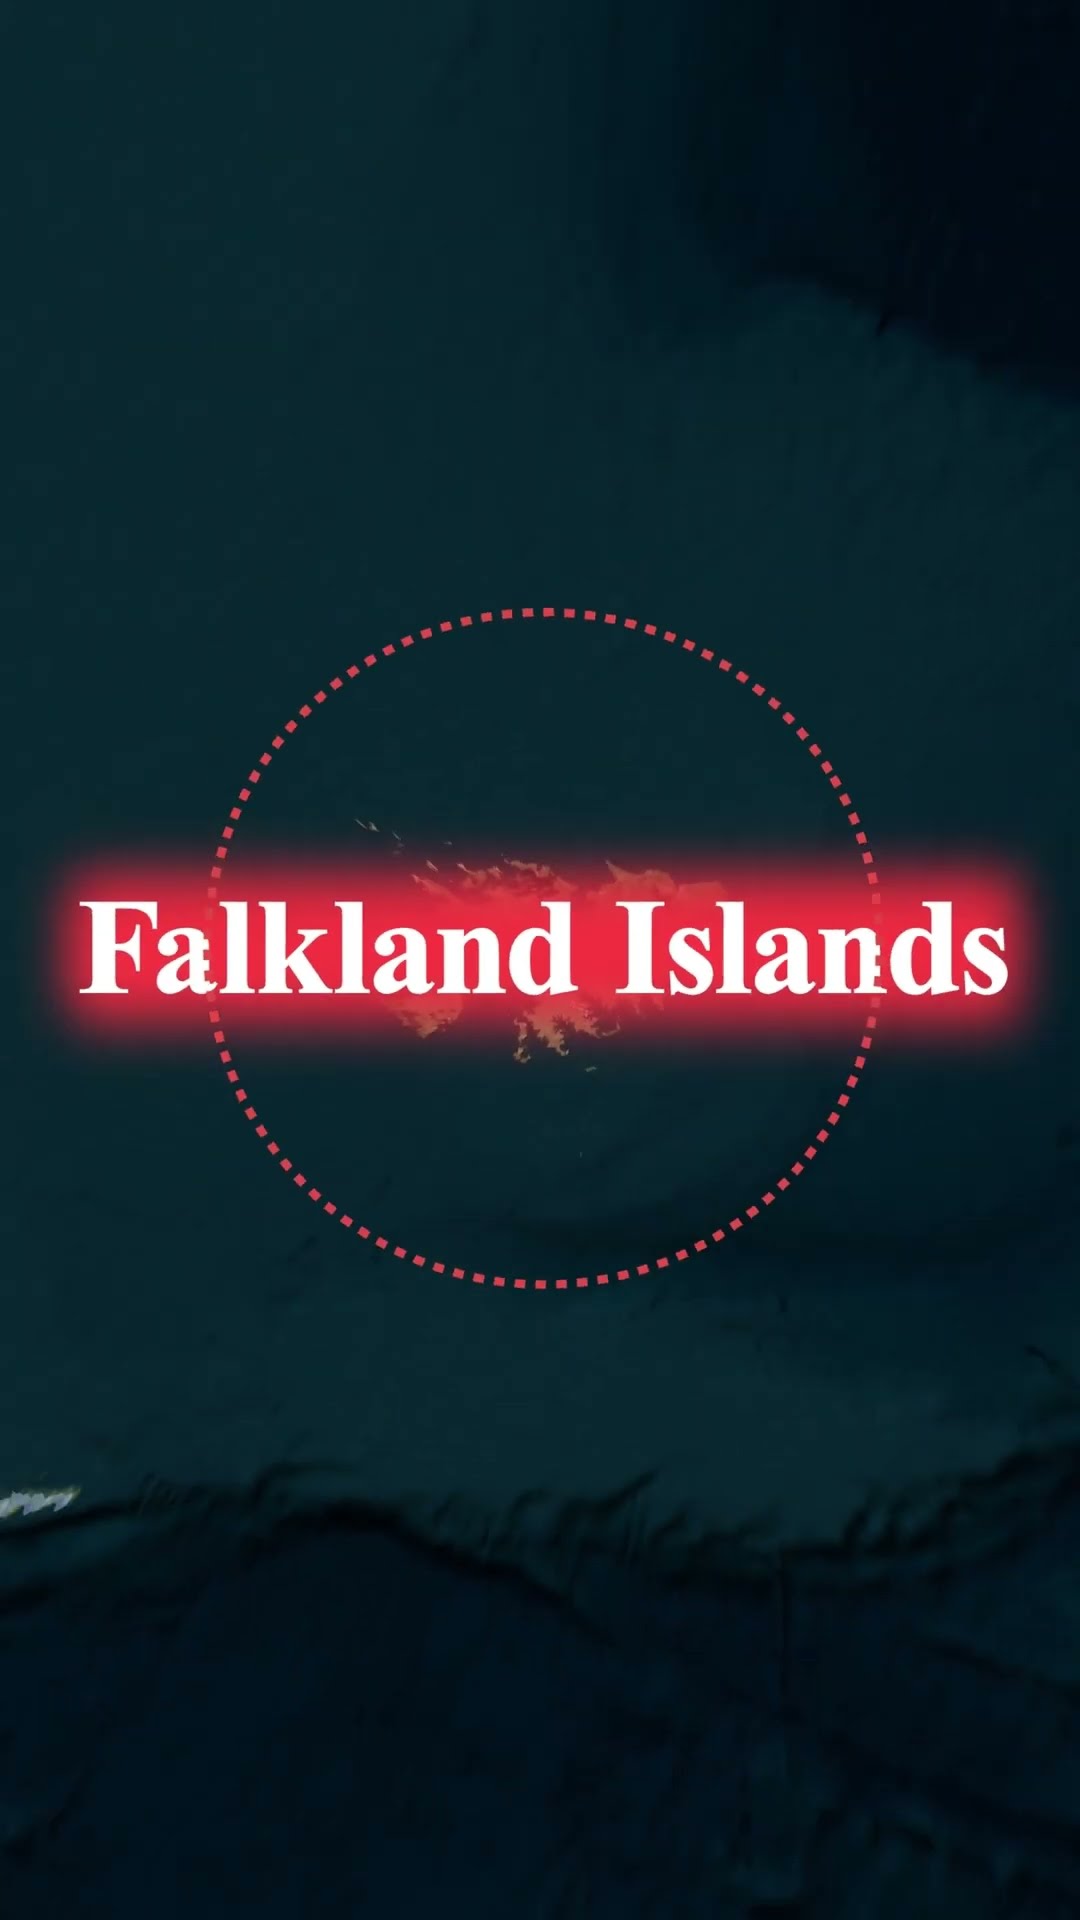 Why did Argentina attack the Falkland Islands? #shorts #history #geopolitics #countriesoftheworld